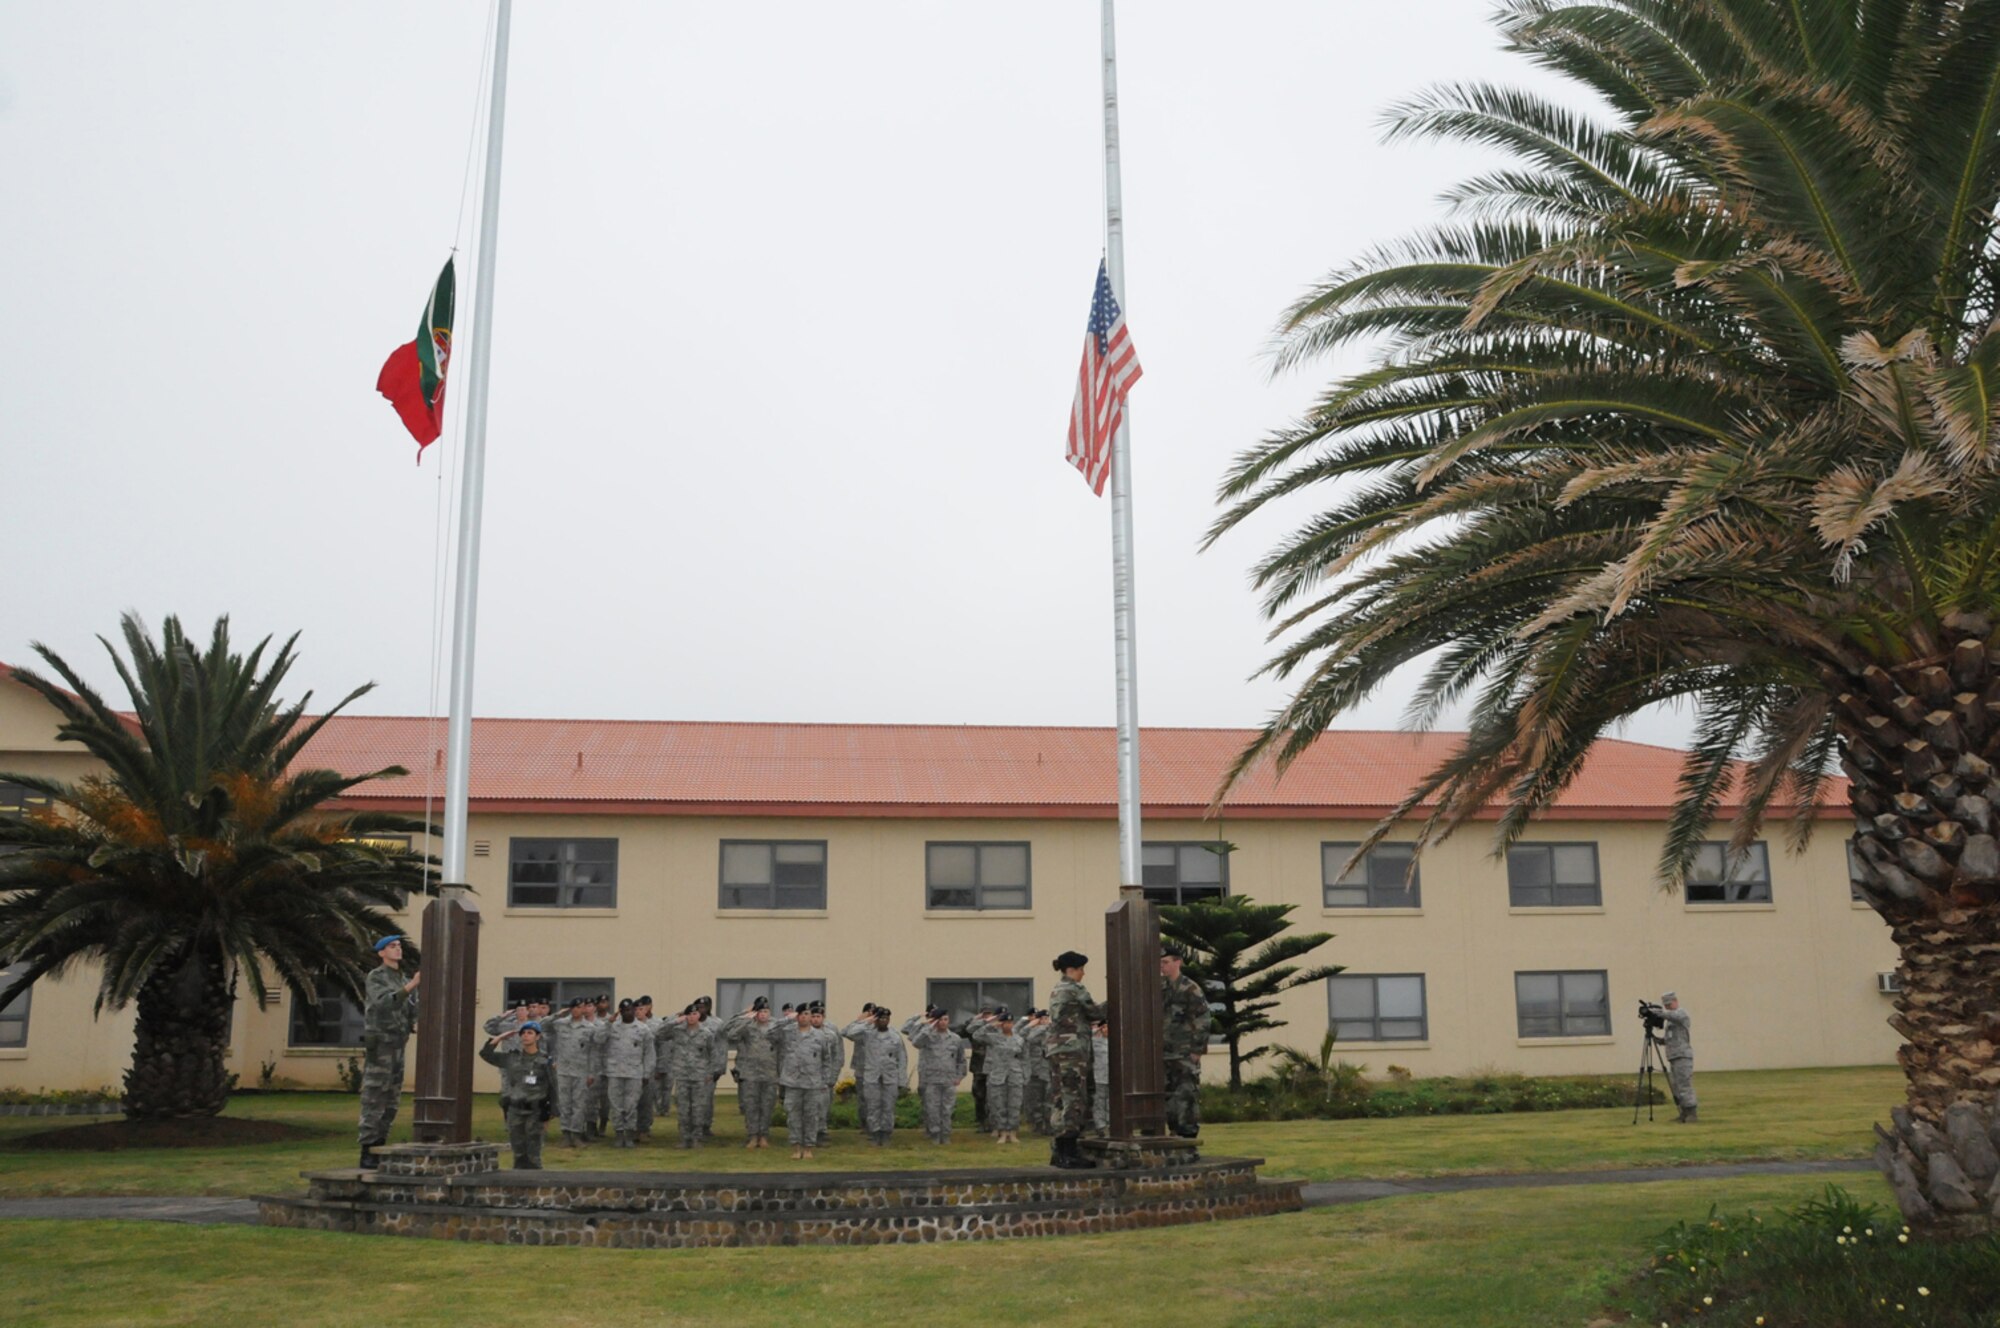 Members of the 65th Security Forces Squadron, at Lajes Field, salute as the American and Portuguese flags are flown half staff in honor of Senior Airman Amber Finell, 65th Security Forces Squadron, at Lajes Field, July 2.  Airman Finnell is from East Tawas, Mich. and entered the Air Force in Feb. 2004.  She had been previously stationed at Minot AFB, N.D. and Sather AB, Baghdad, Iraq; she passed away on June 30, 2009.  (U.S. Air Force photo by Tech Sgt. Rebecca F. Corey)